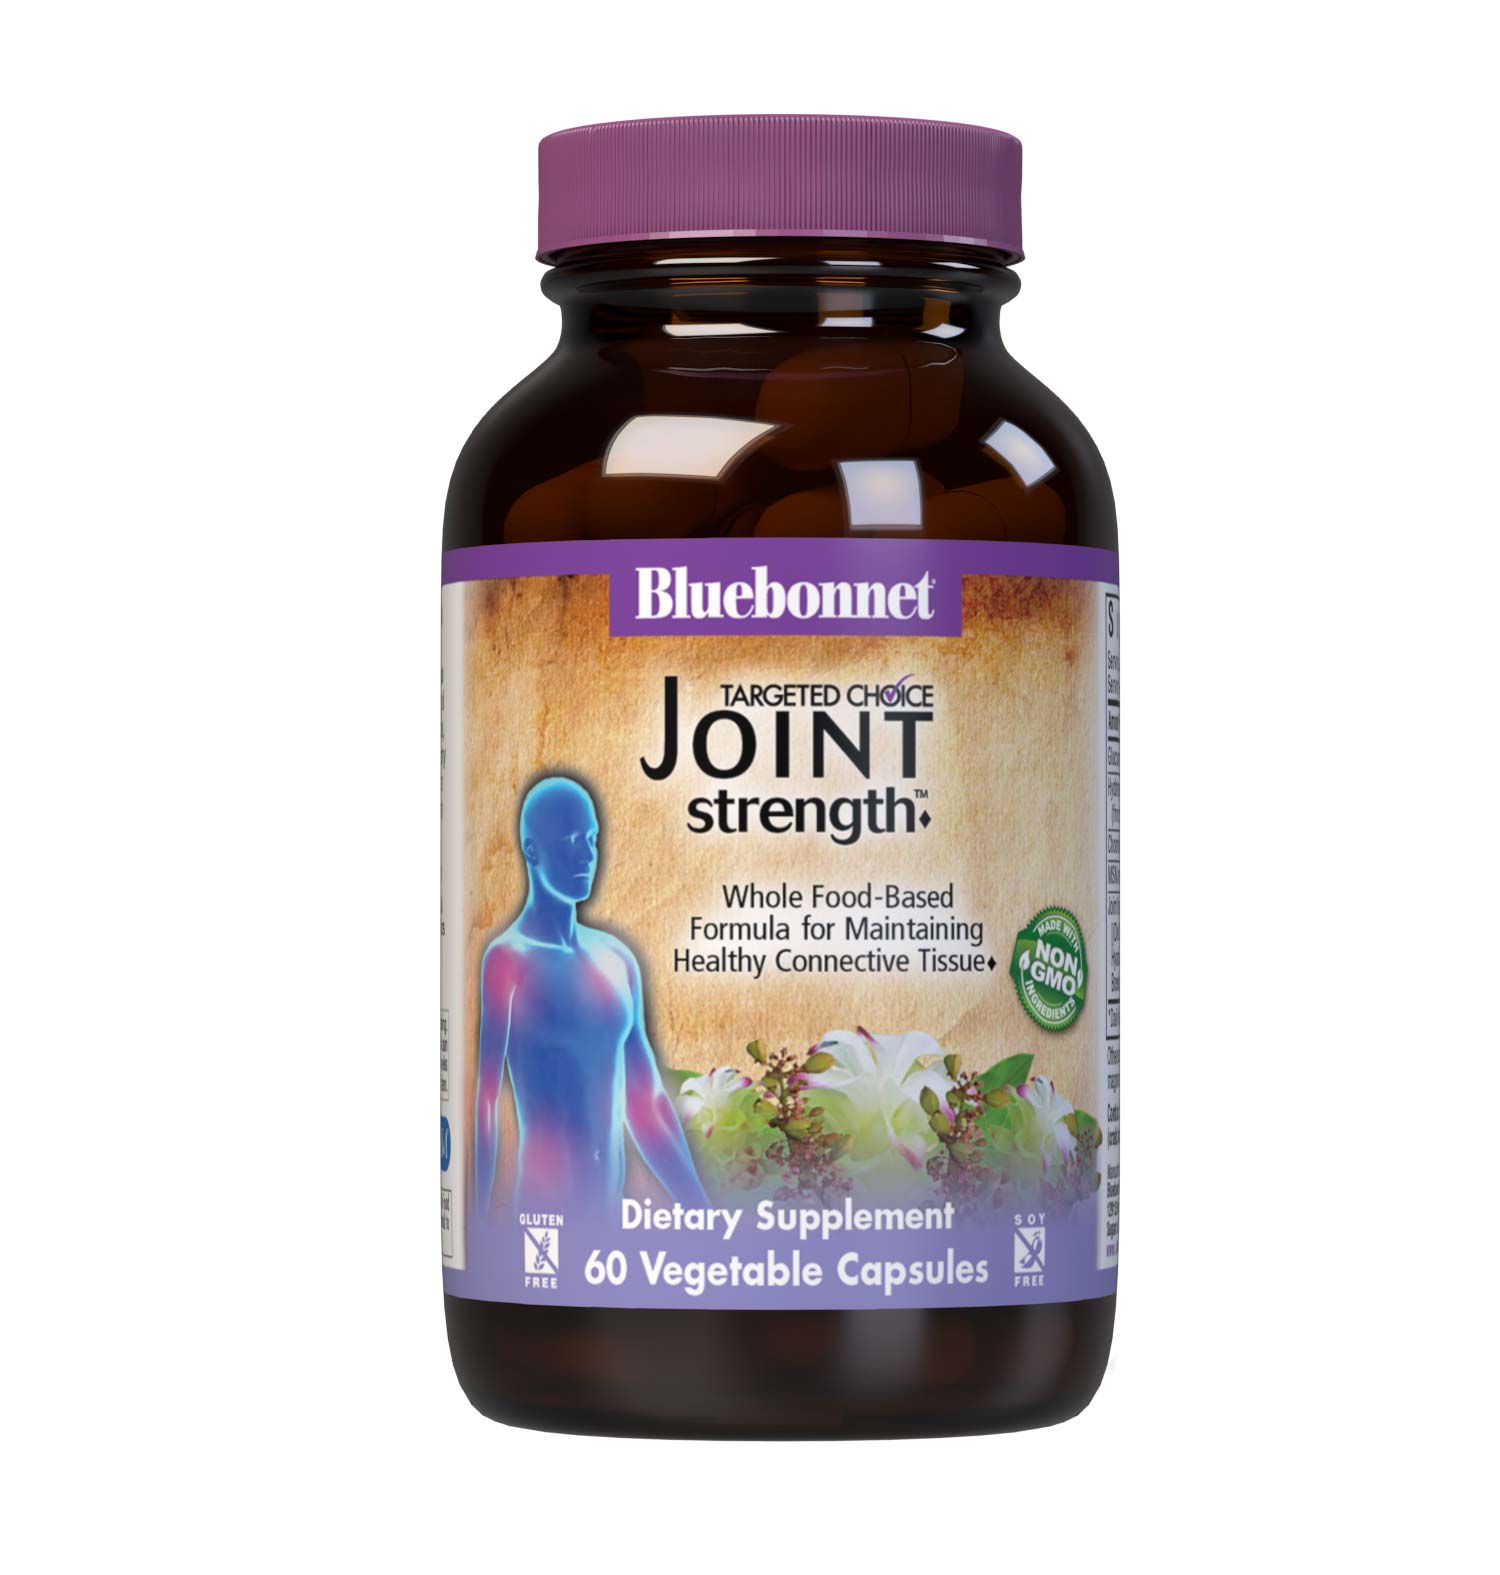 Bluebonnet’s Targeted Choice JointStrength 60 Vegetable Capsules are specially formulated to help optimize joint flexibility, mobility and range of motion by maintaining healthy connective tissues (cartilage, tendons and ligaments), as well as supporting a healthy inflammatory response in joints. This product only influences inflammation from a specific non-disease cause, like physical overexertion of the joints after intense exercise. #size_60 count